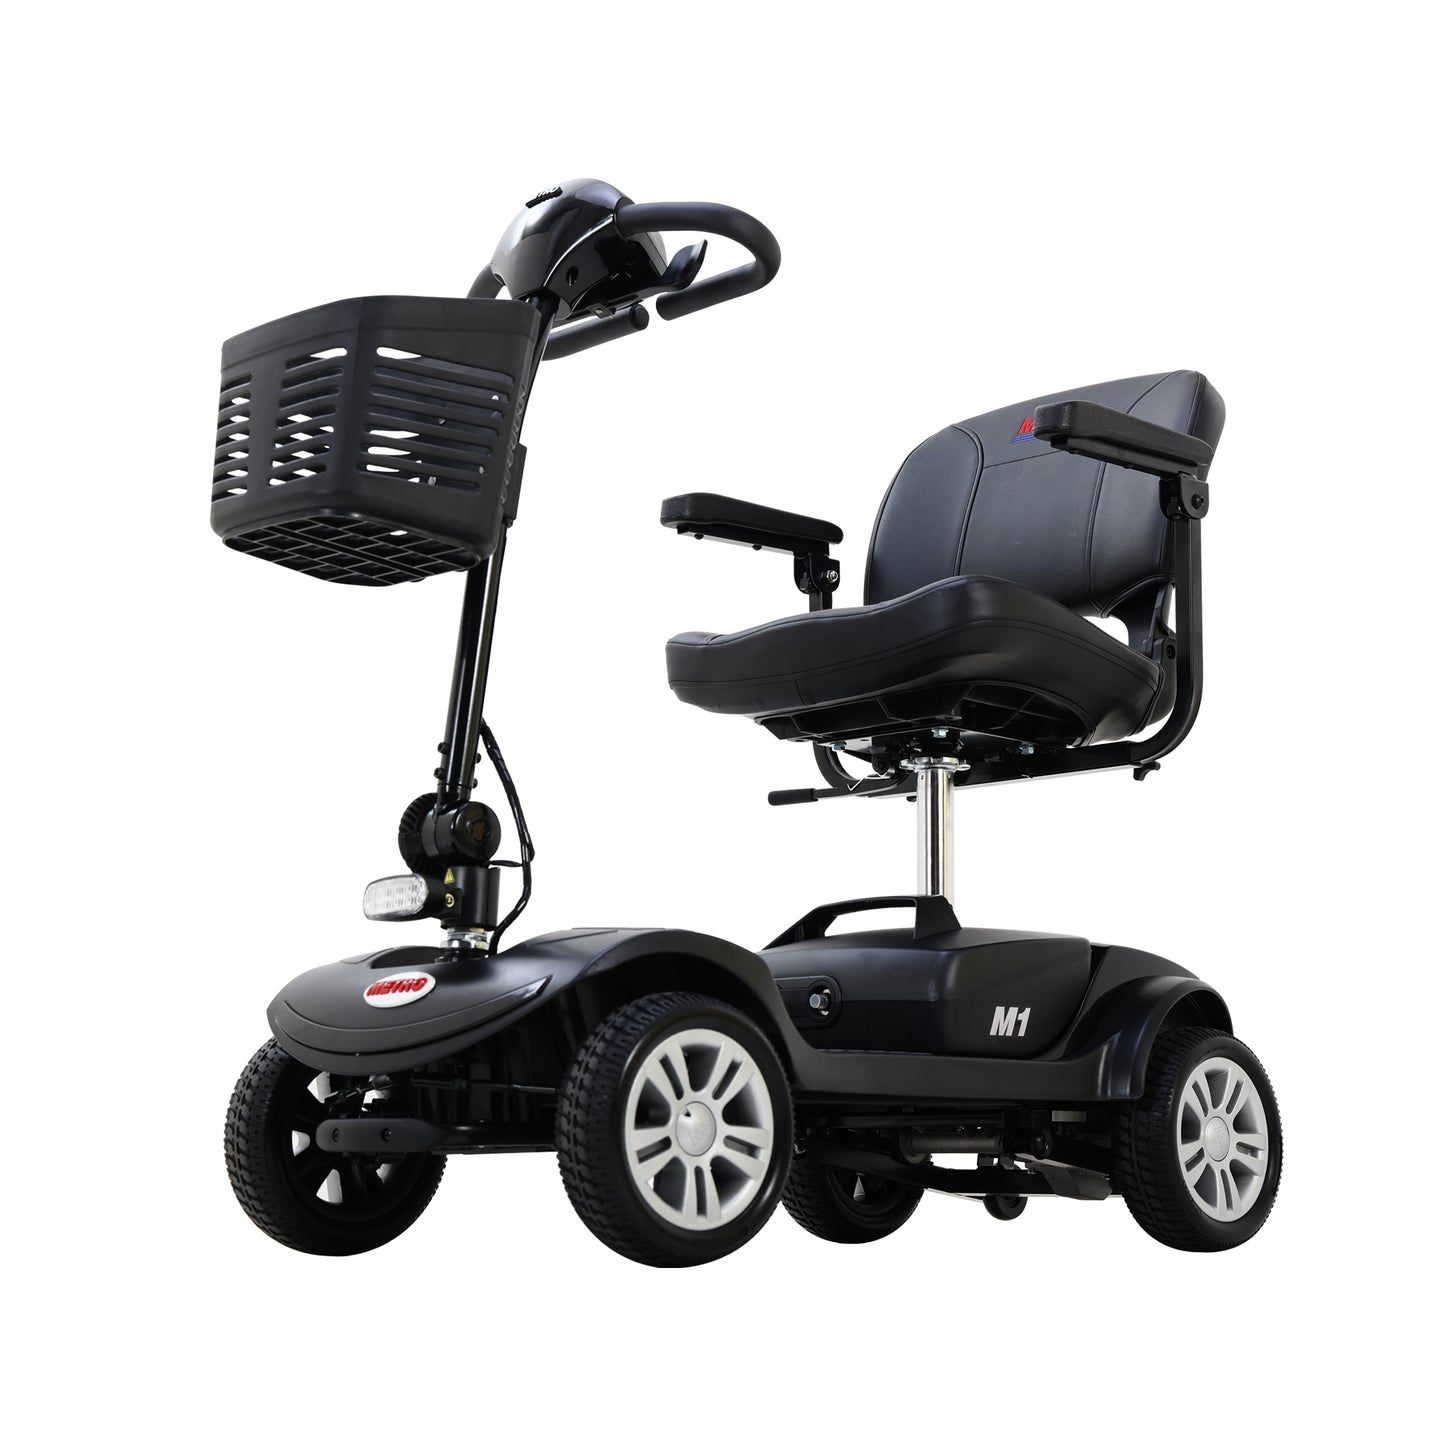 Metro M1 Mobility Scooter - Black